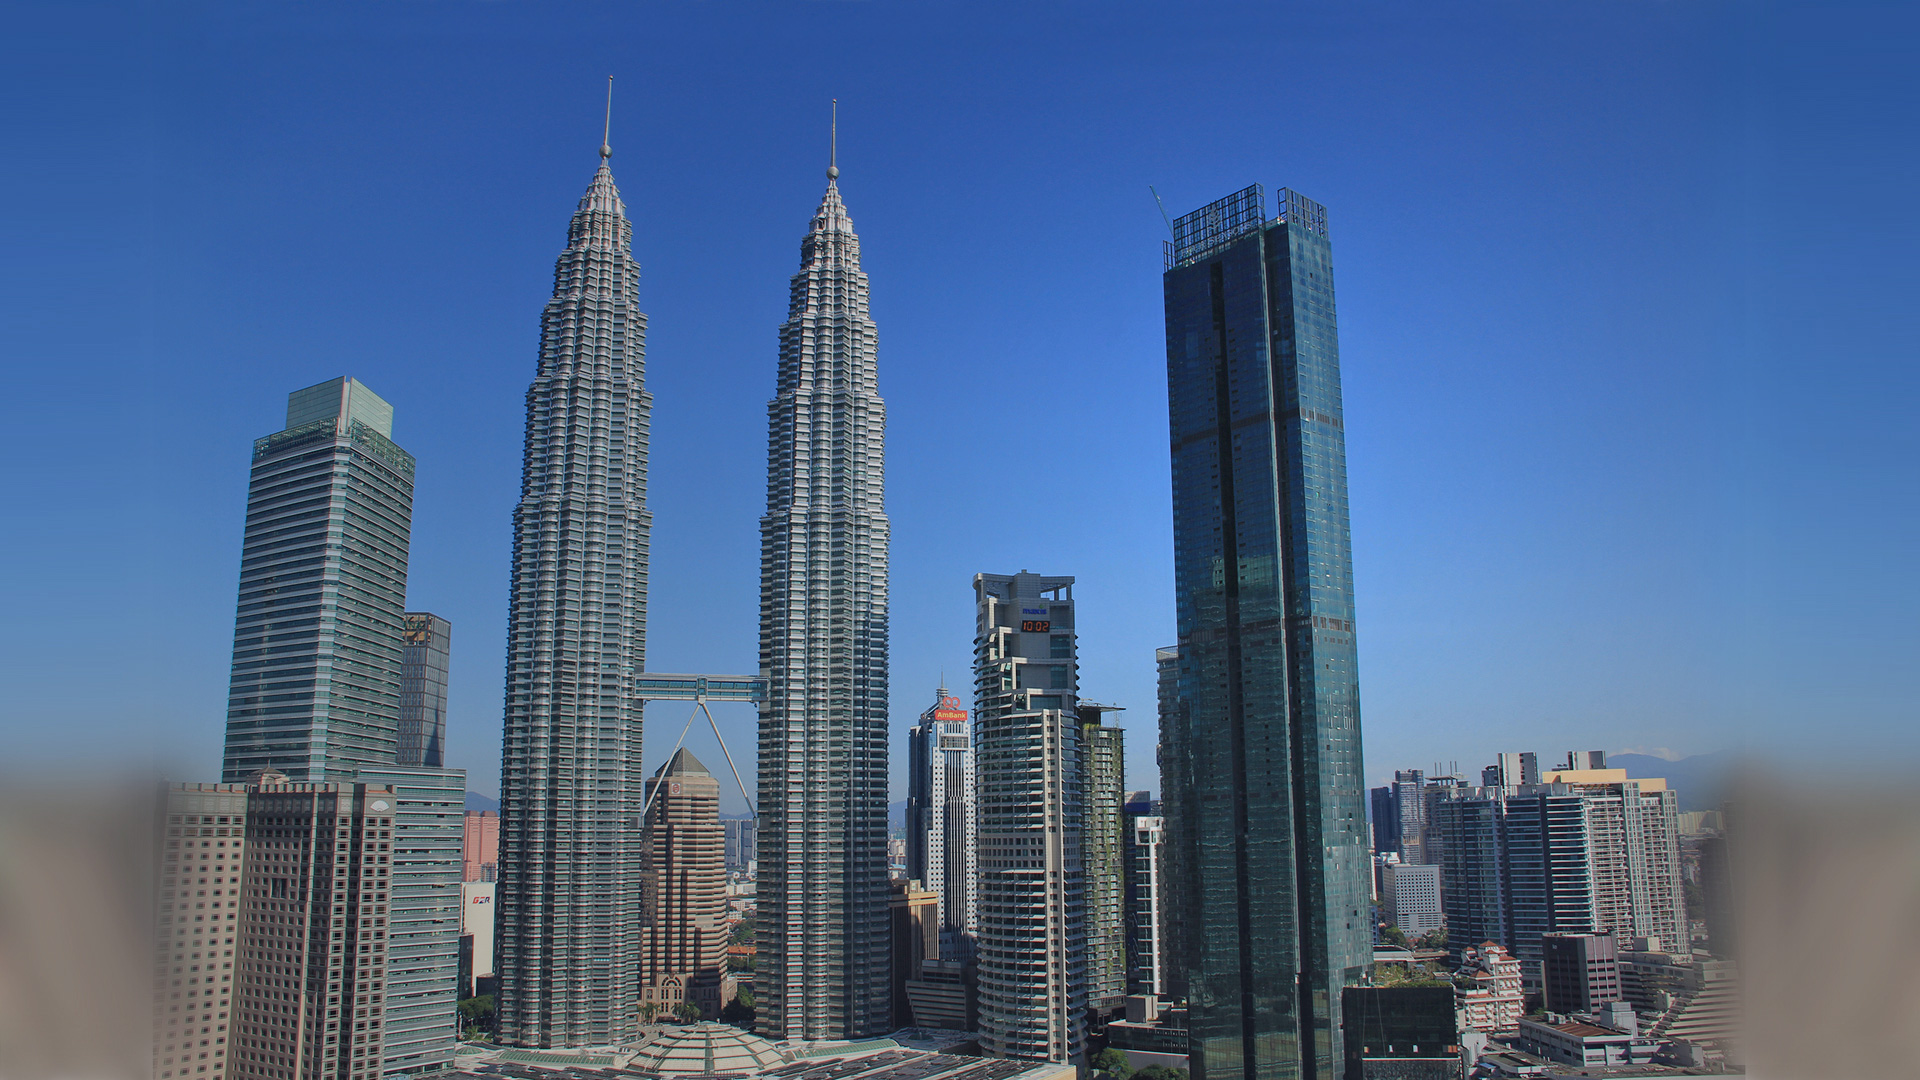 Destined to become the capital’s second highest building with 77 floors, the 343 metre high Four Seasons Place is right next to the iconic Petronas Towers skyscrapers.